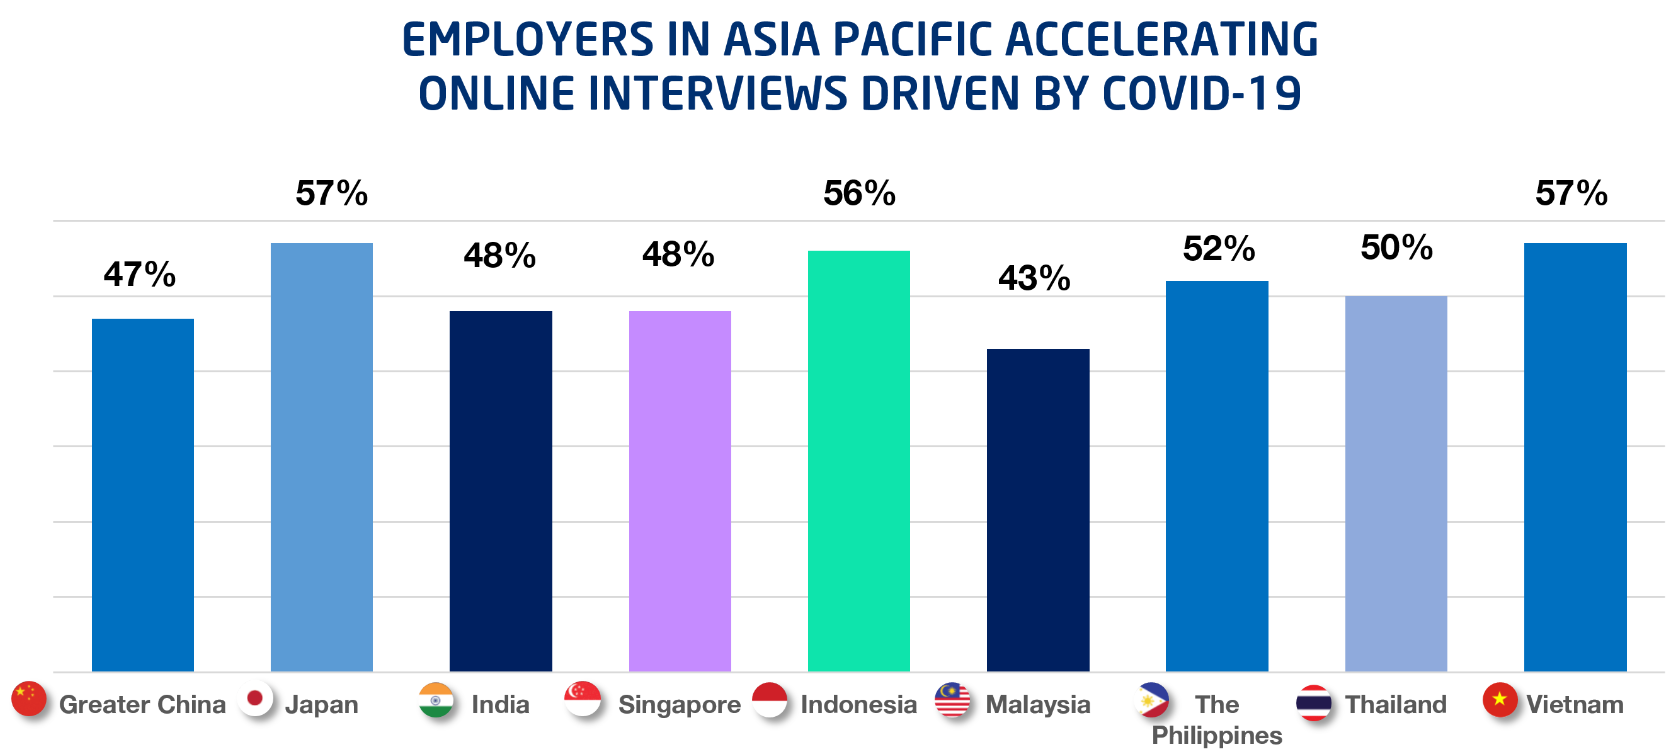 EMPLOYERS IN ASIA PACIFIC ACCELERATING ONLINE INTERVIEWS DRIVEN BY COVID-19